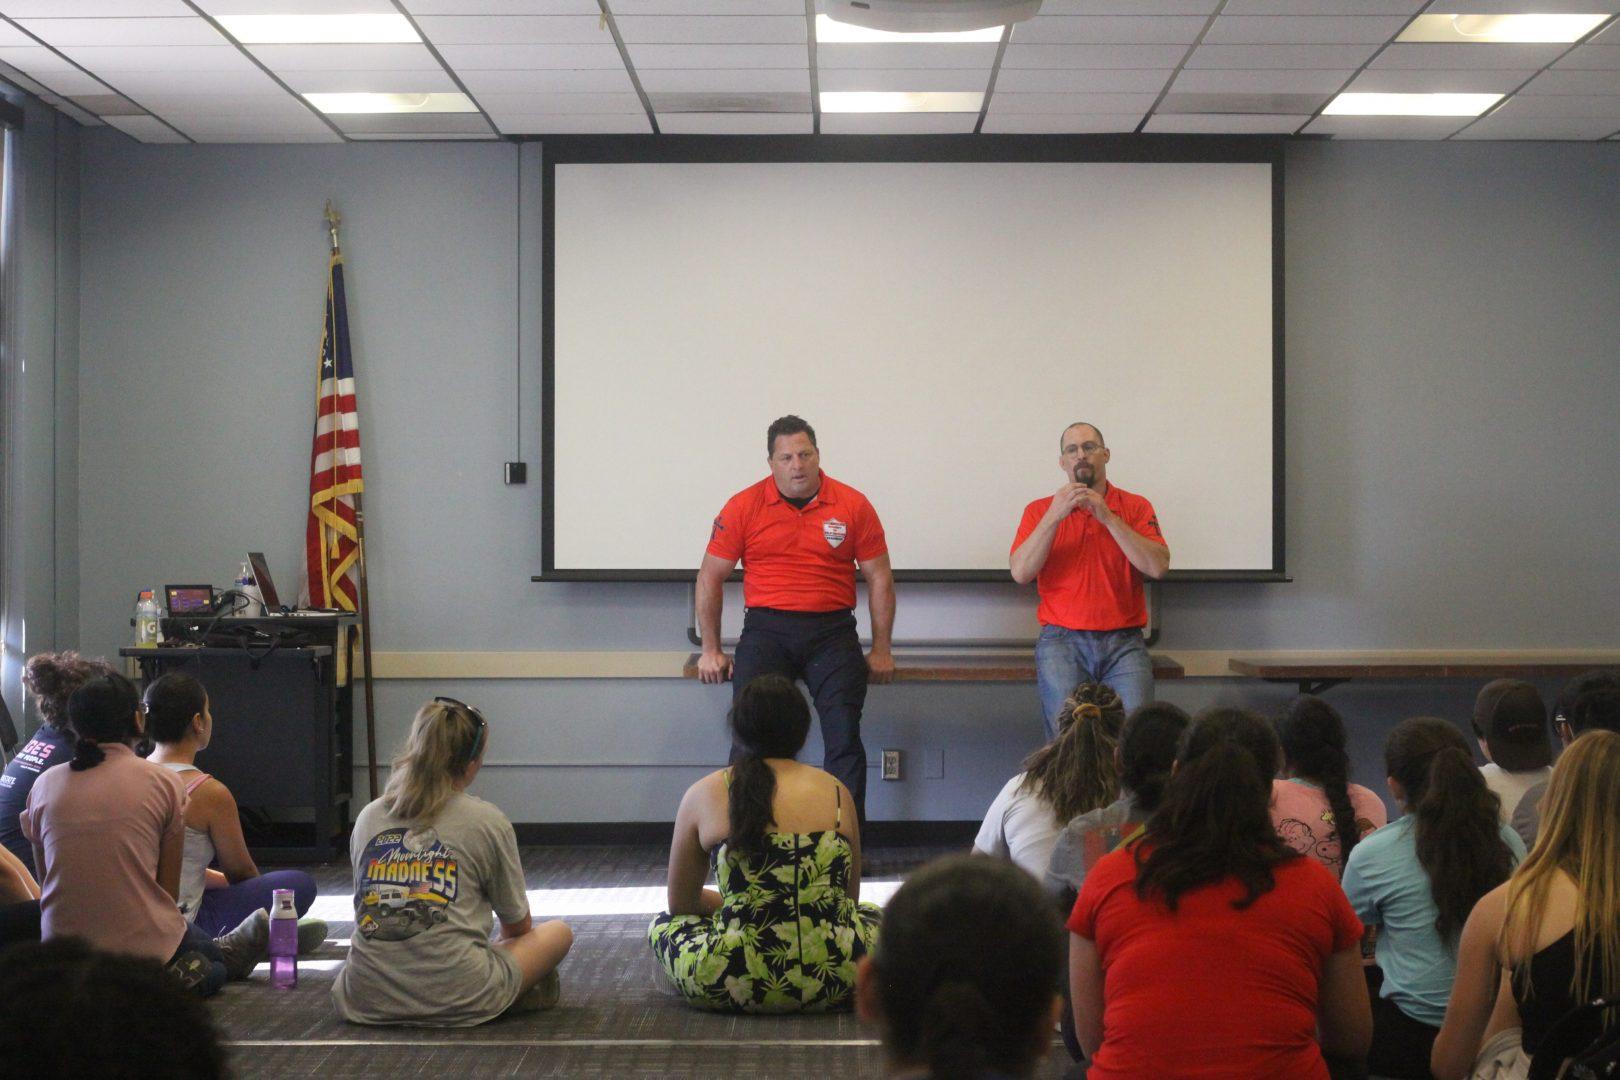 Fresno State Spotlight Events hosted the Safety & Self-Defense Workshop at the University Student Union on Sept. 7, 2022. (Manuel Hernandez/The Collegian)